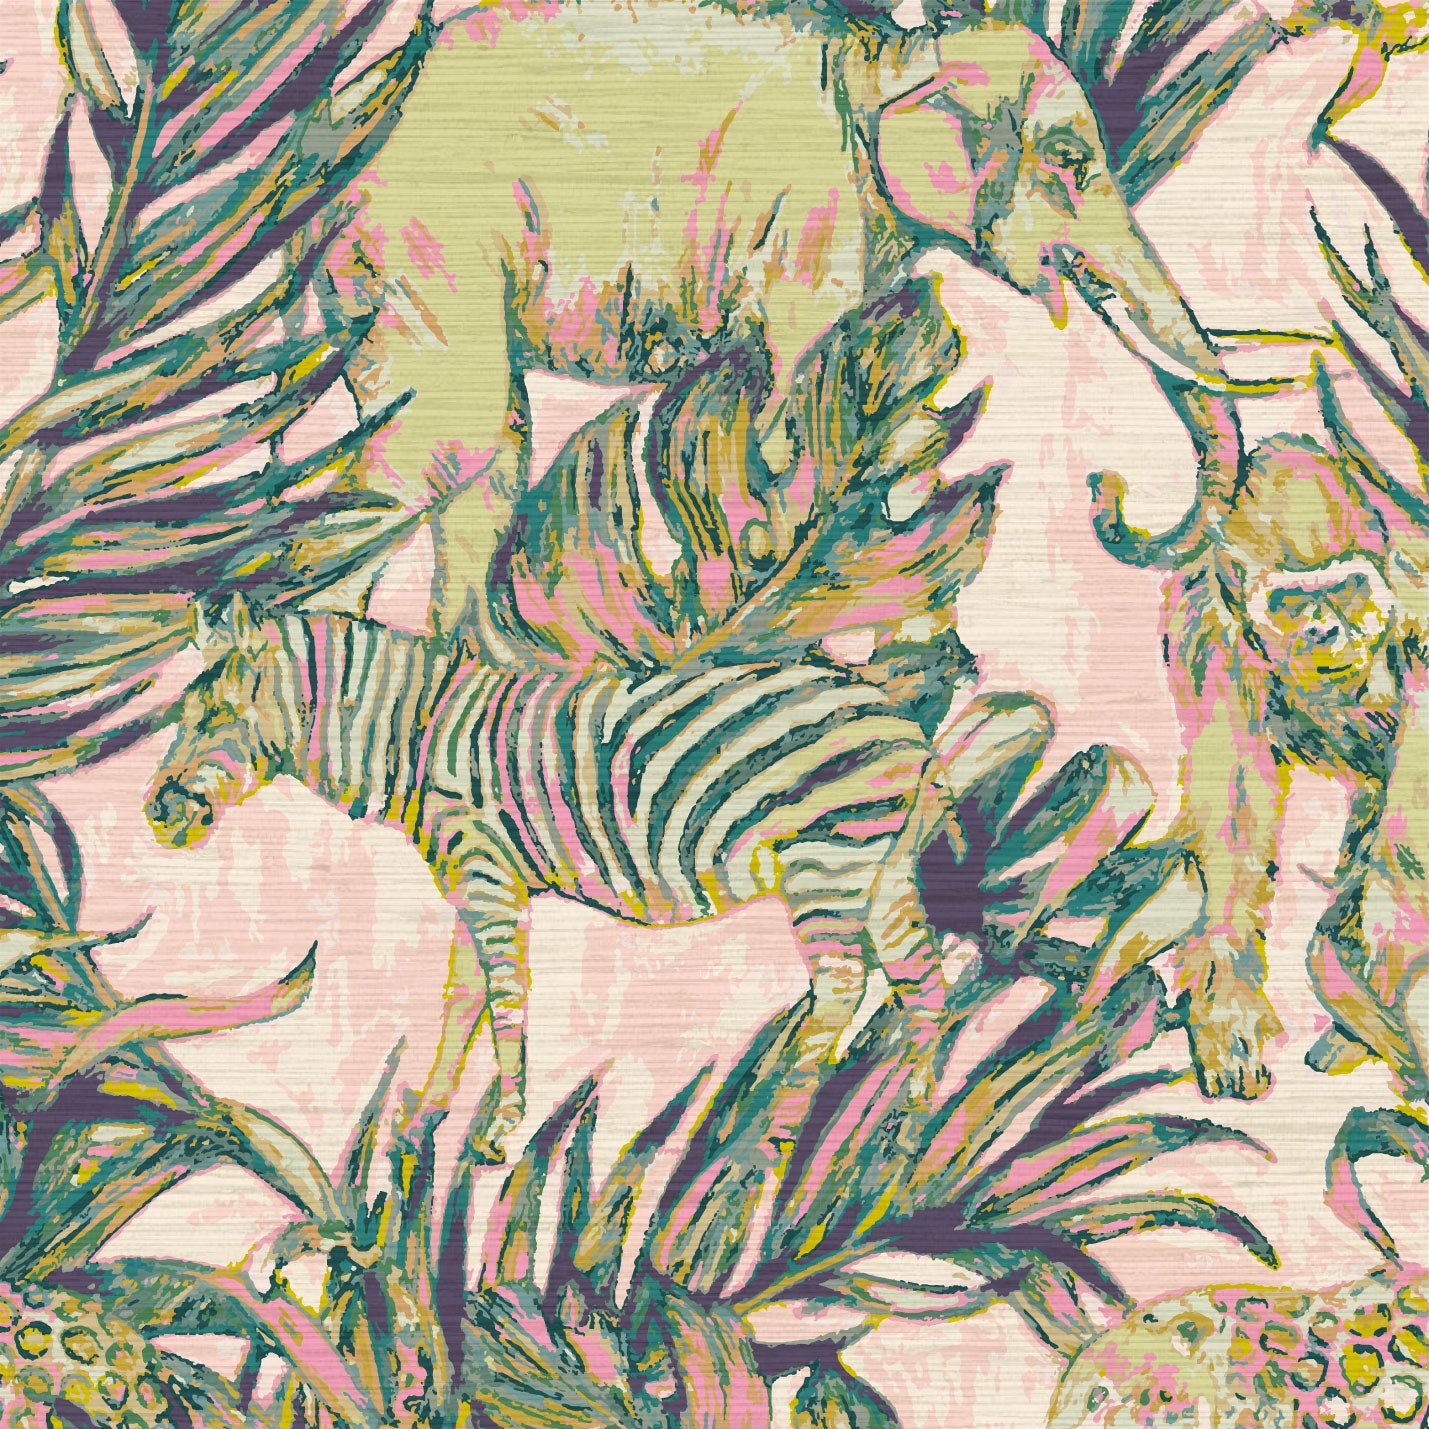 Load image into Gallery viewer, Grasscloth wallpaper Natural Textured Eco-Friendly Non-toxic High-quality  Sustainable Interior Design Bold Custom Tropical Jungle Coastal Garden palm leaf tree zoo safari elephant zebra cheetah gorilla water color oversized kids playroom nursery green pastel neon pink
